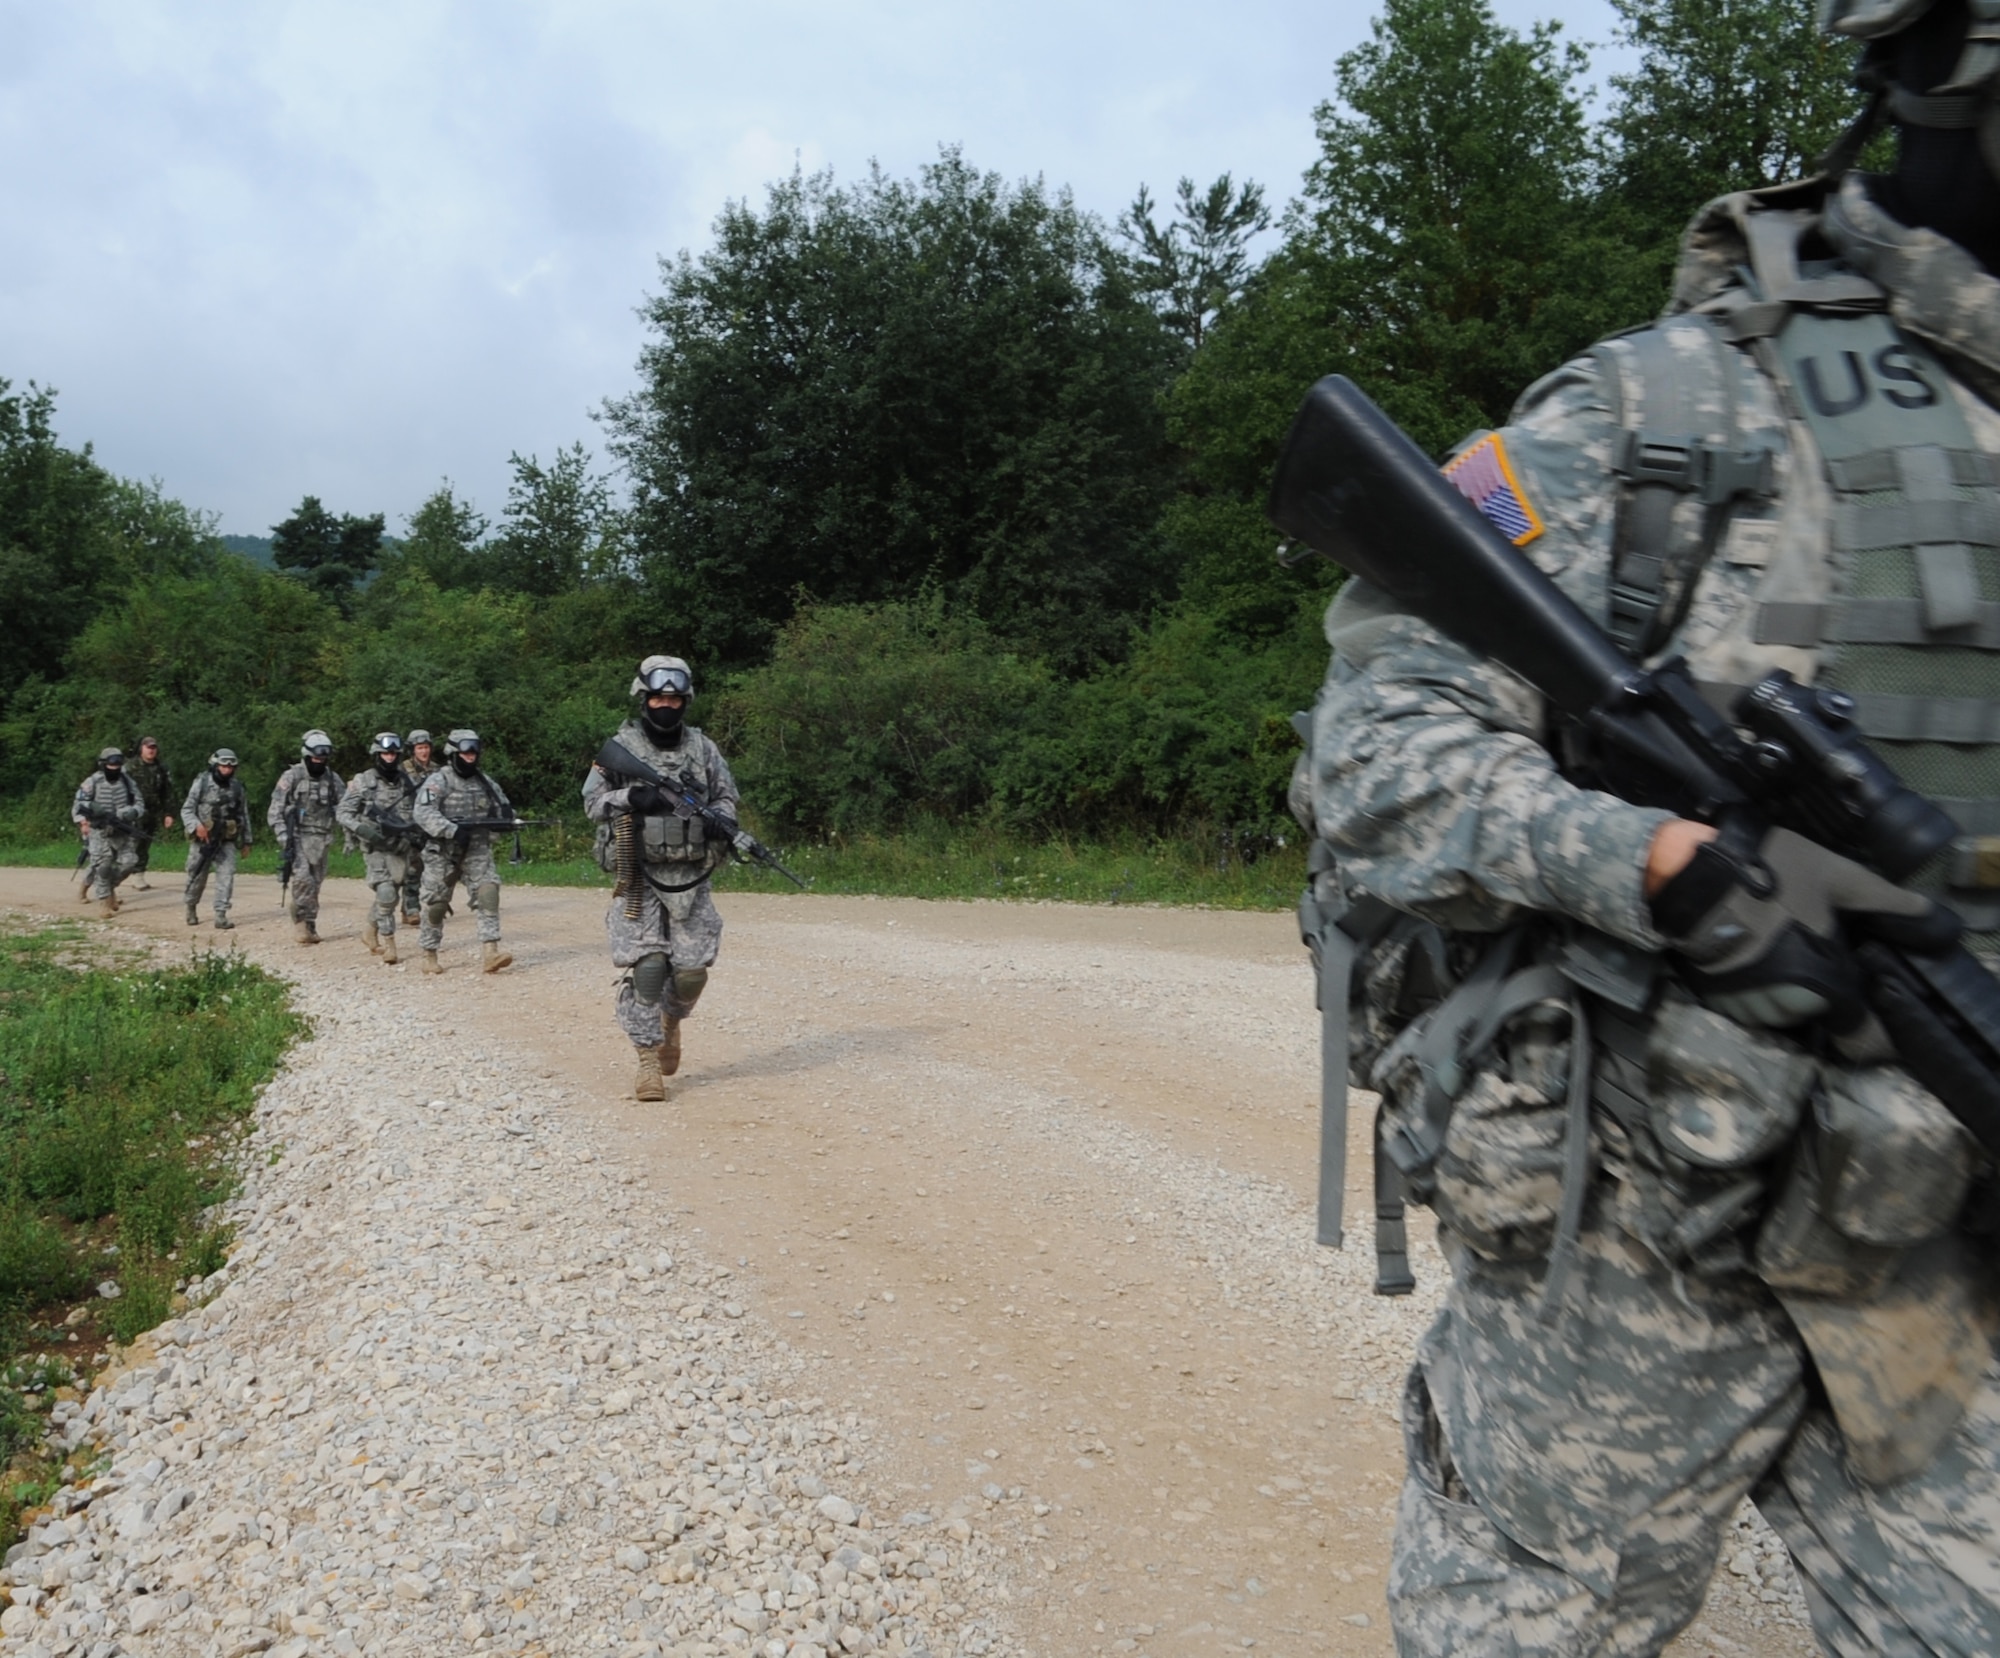 U.S. Air Force, Army and North Atlantic Treaty Organization's (NATO) members walk to the loading zone for an air assault mission scenario during exercise ALLIED STRIKE 10, Hohenfels, Germany, Aug. 3, 2010. AS 10 is Europe's premier close air support (CAS) exercise, held annually to conduct robust, realistic CAS training that helps build partnership capacity among allied NATO nations and joint services while refining the latest operational CAS tactics. For more ALLIED STRIKE information go to www.usafe.af.mil/alliedstrike.asp. (U.S. Air Force photo by Senior Airman Caleb Pierce)